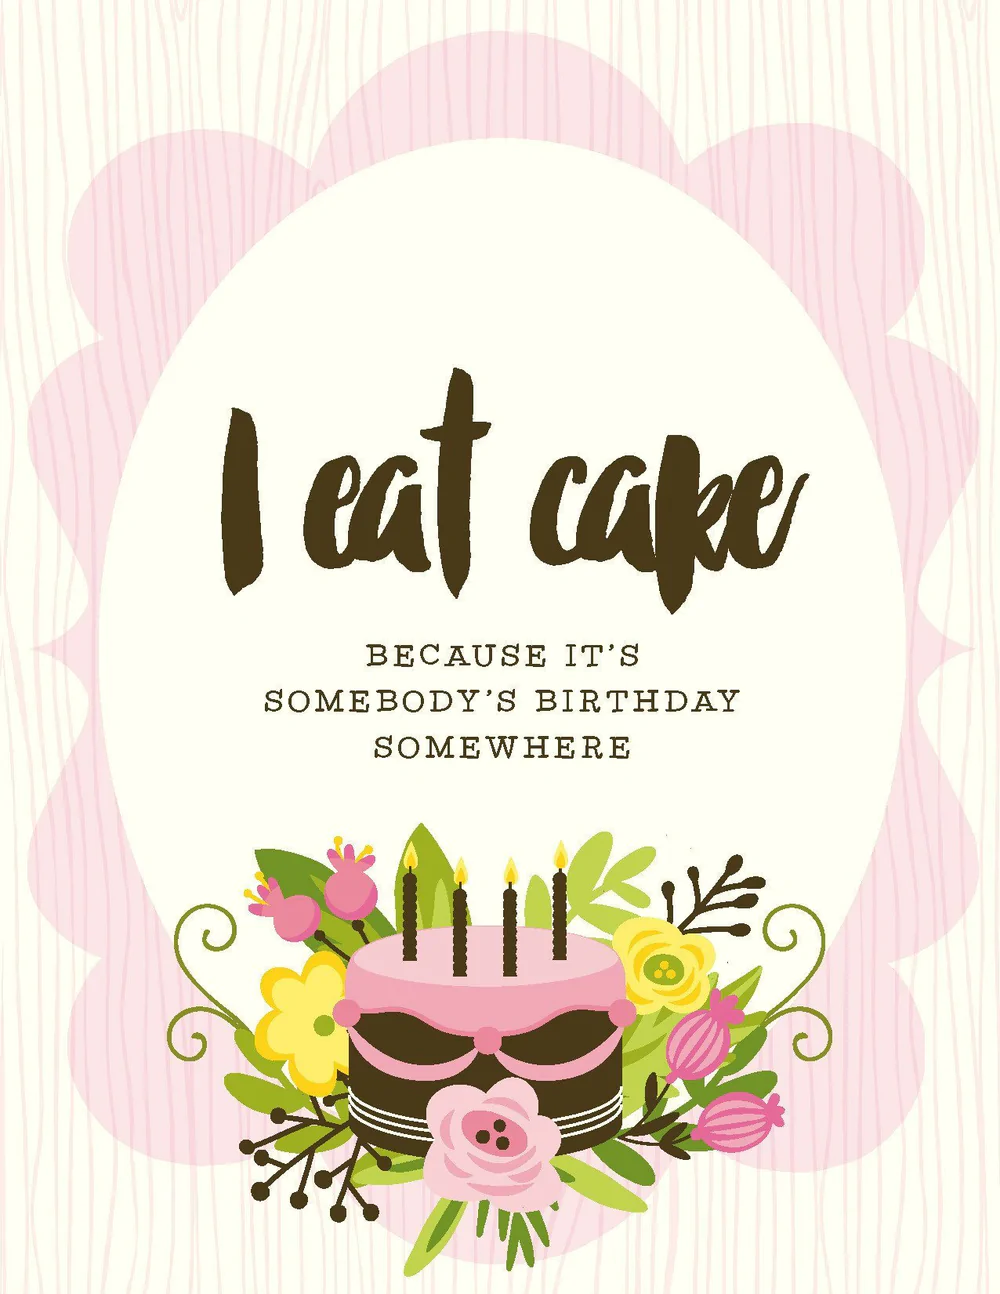 Yellow Bird Paper Greetings -Eat Cake Card Product Image 1 of 1